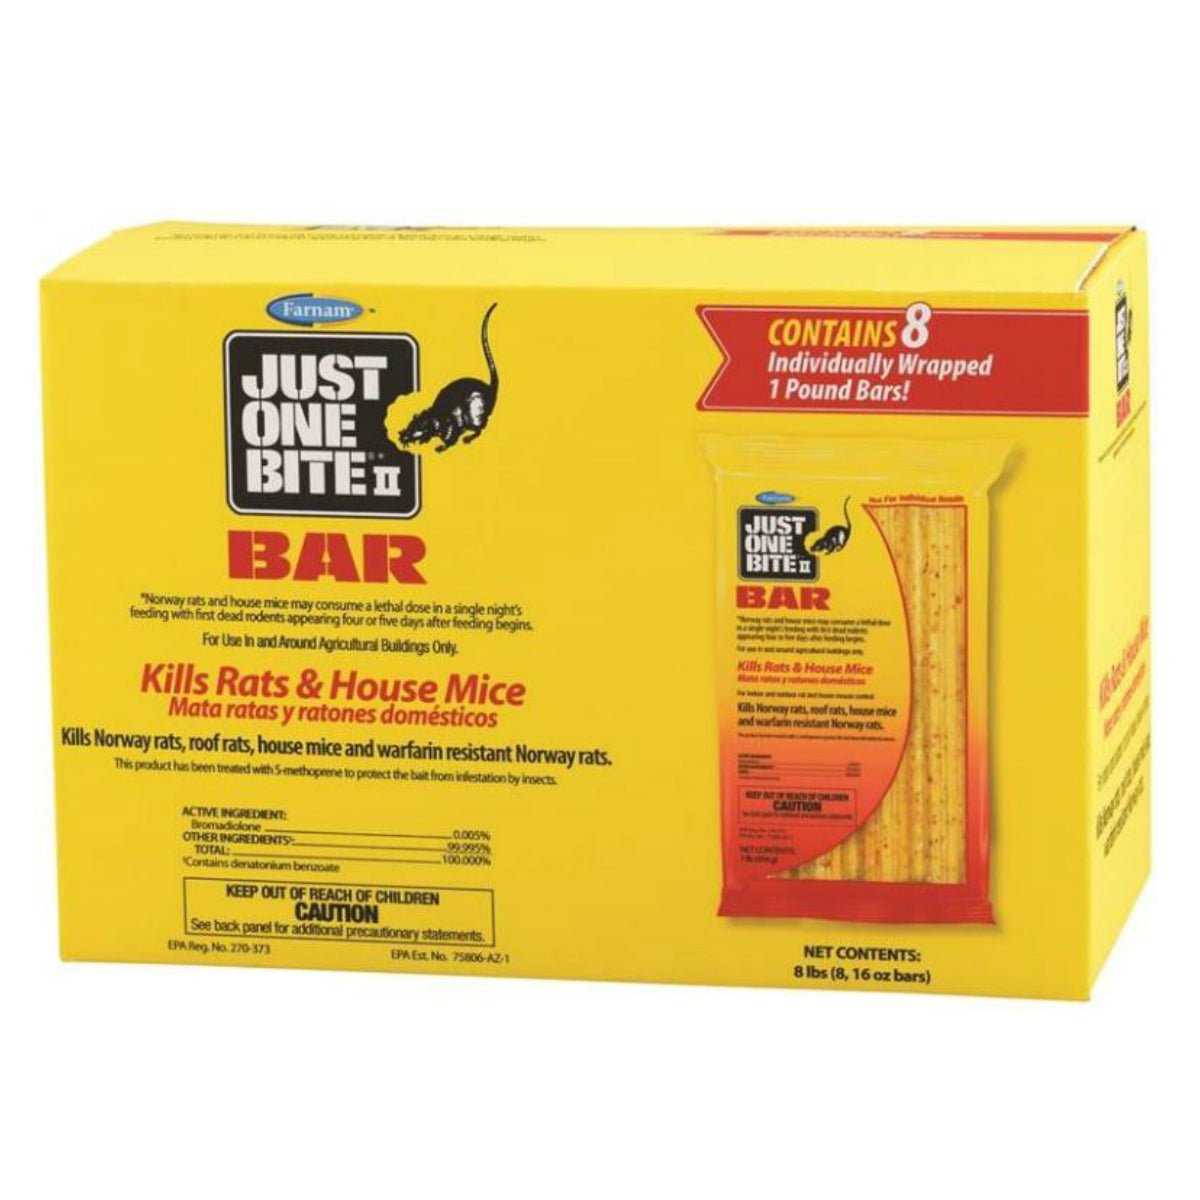 Just One Bite 100504295 Rat And Mouse Control Bar, 16 Oz.